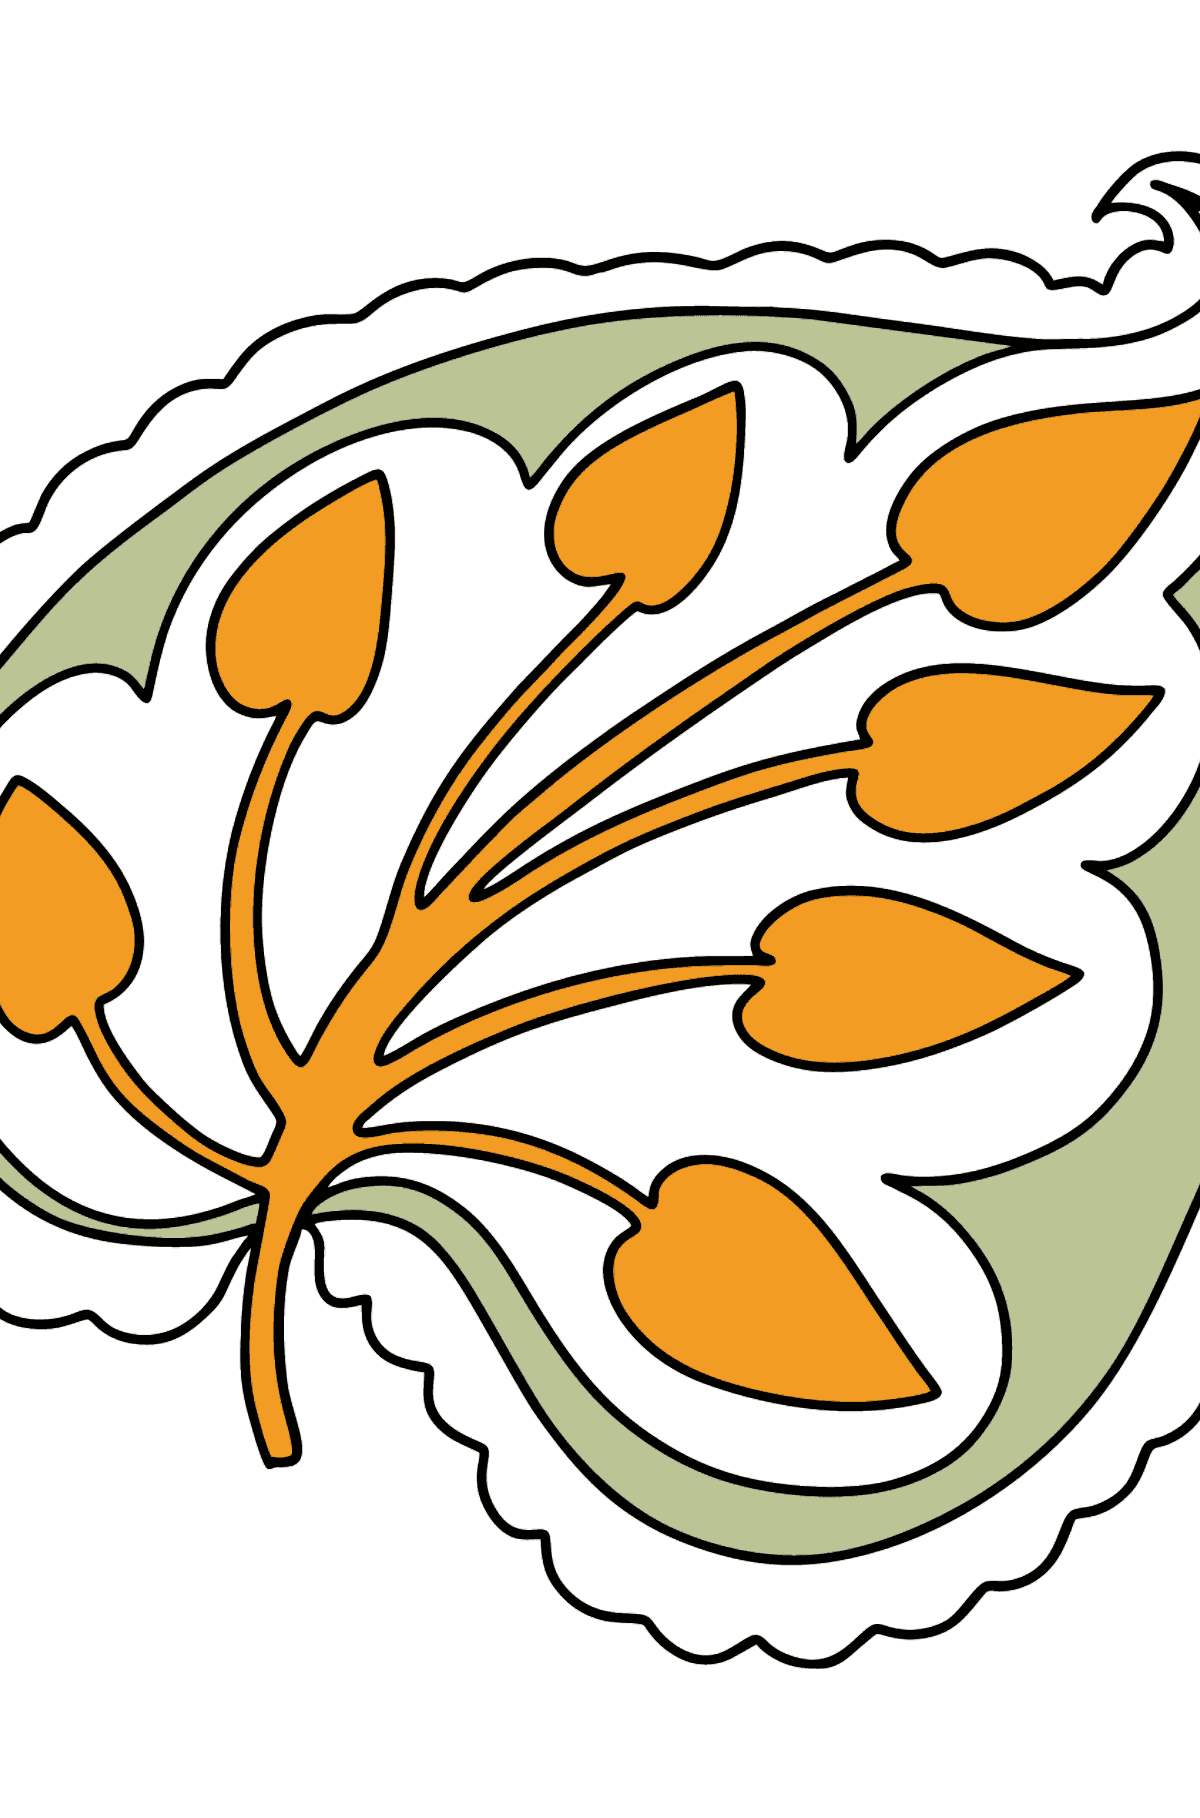 King's Leaf coloring page - Coloring Pages for Kids